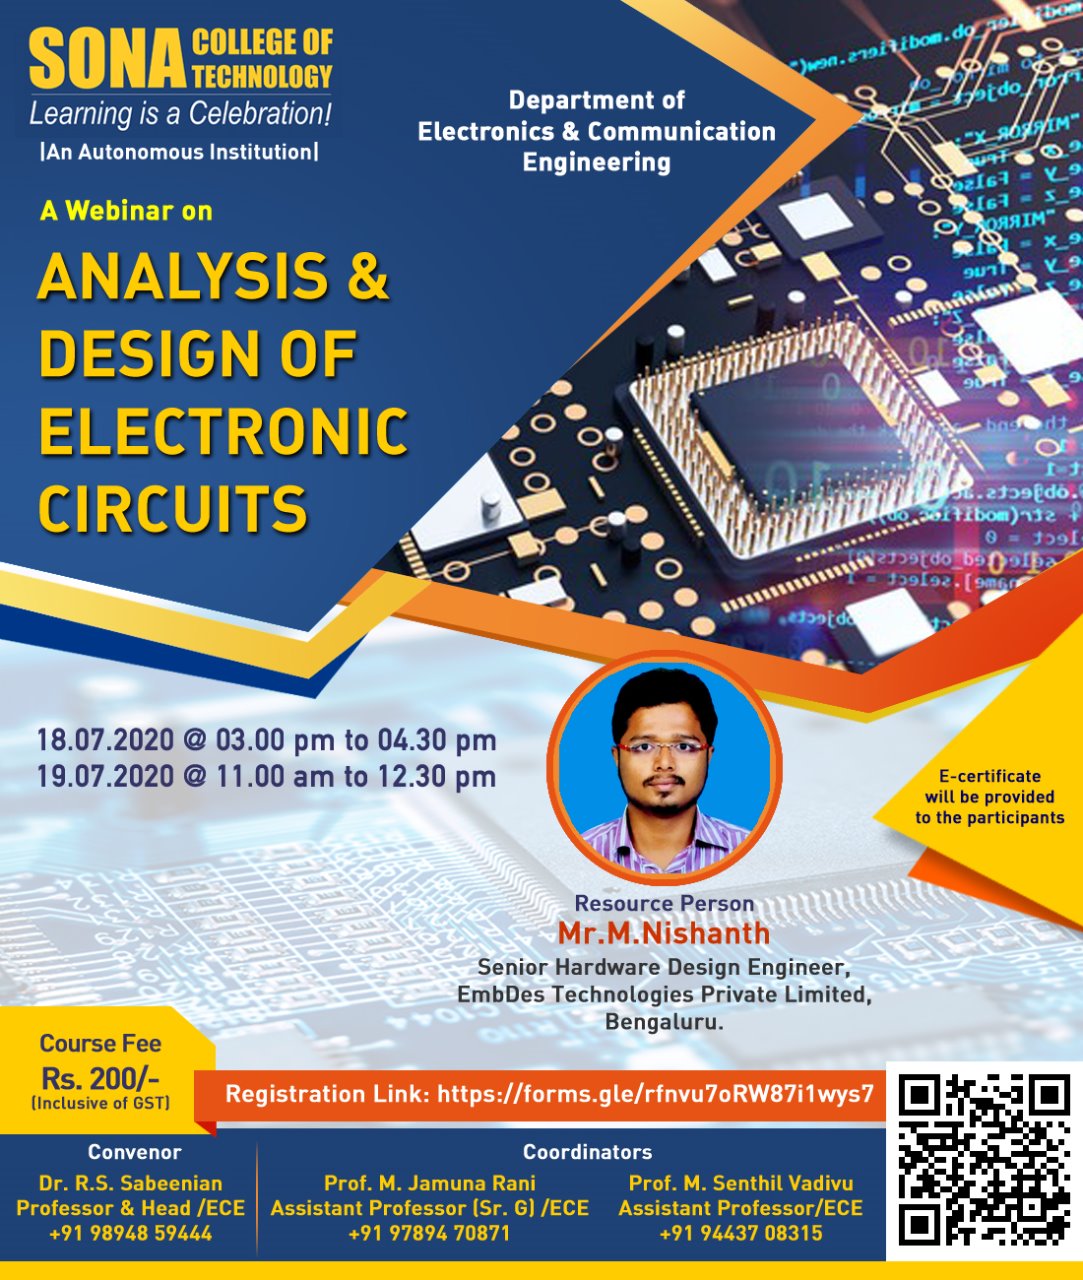 Webinar on "Analysis and design of electronic circuits"